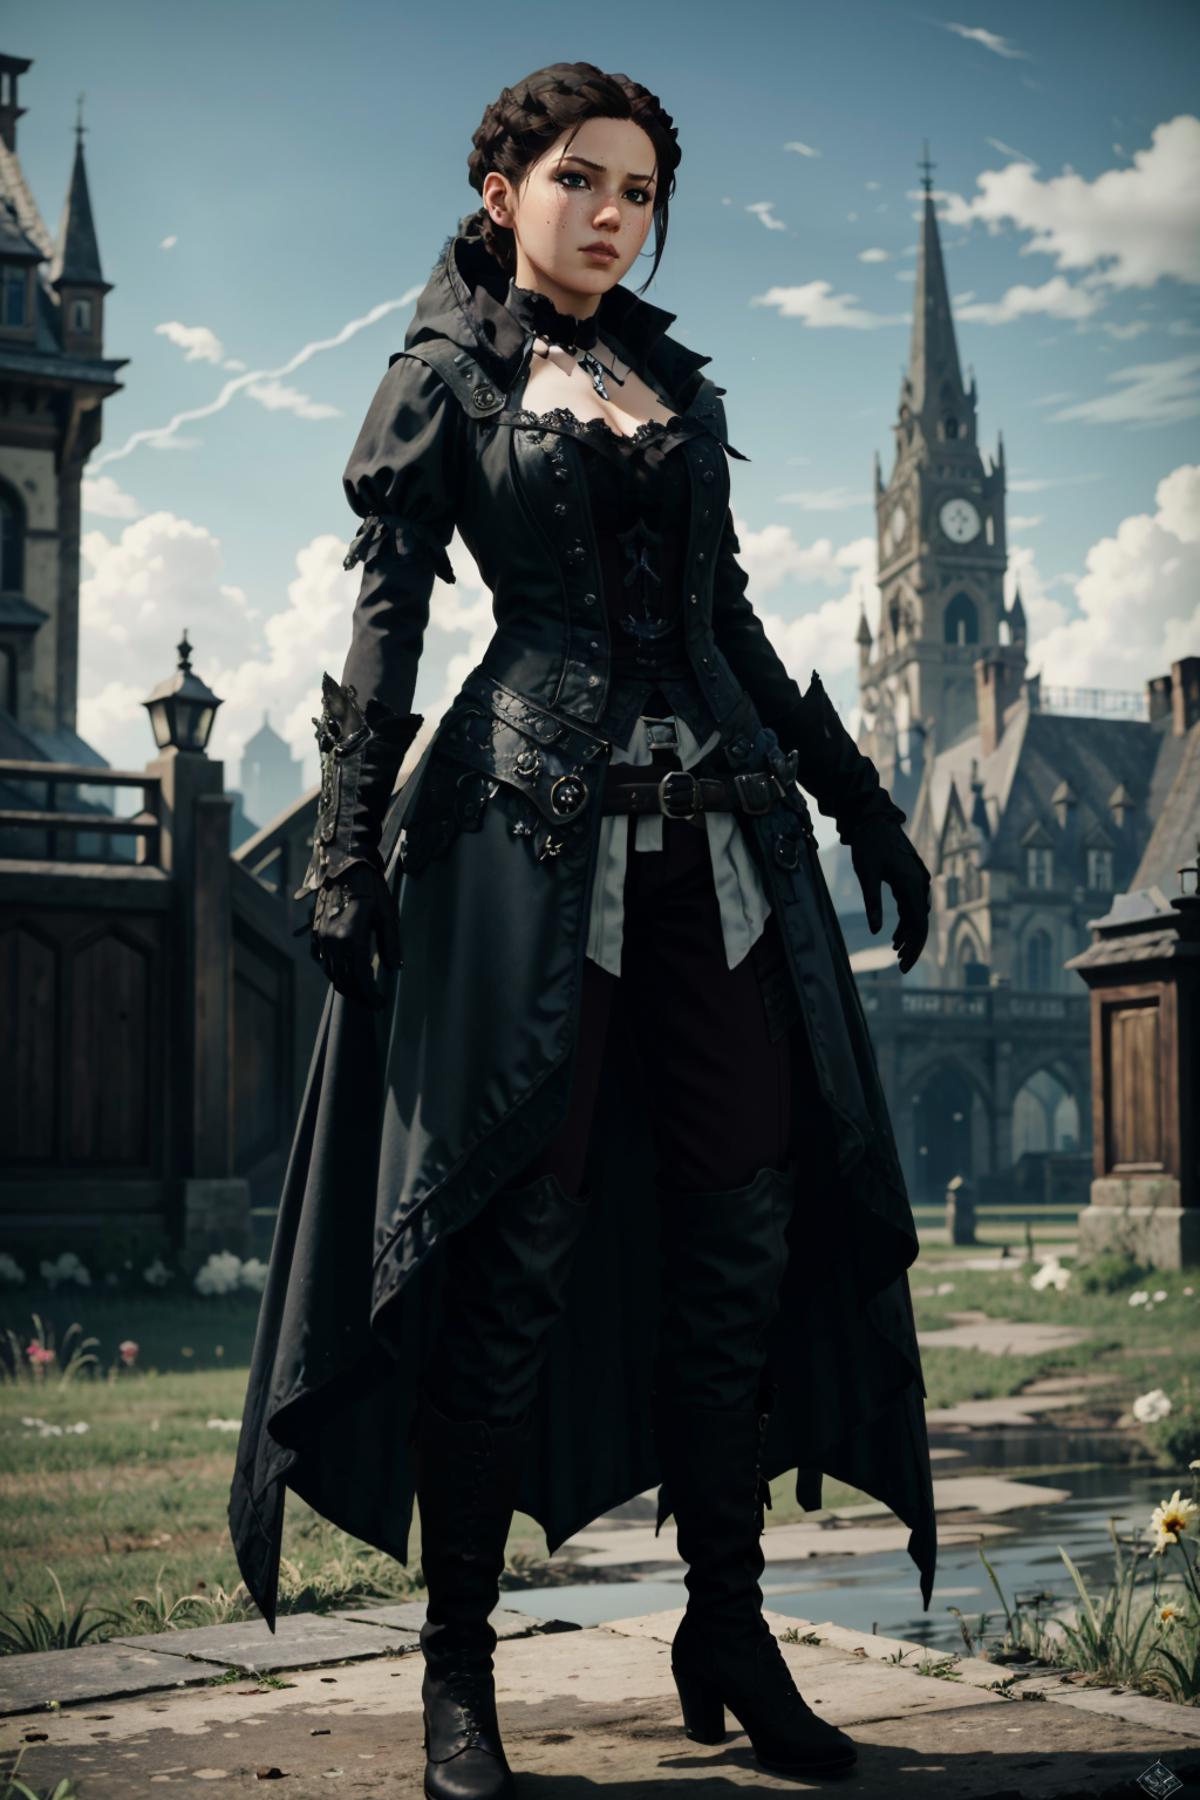 Evie Frye from Assassin's Creed Syndicate image by BloodRedKittie